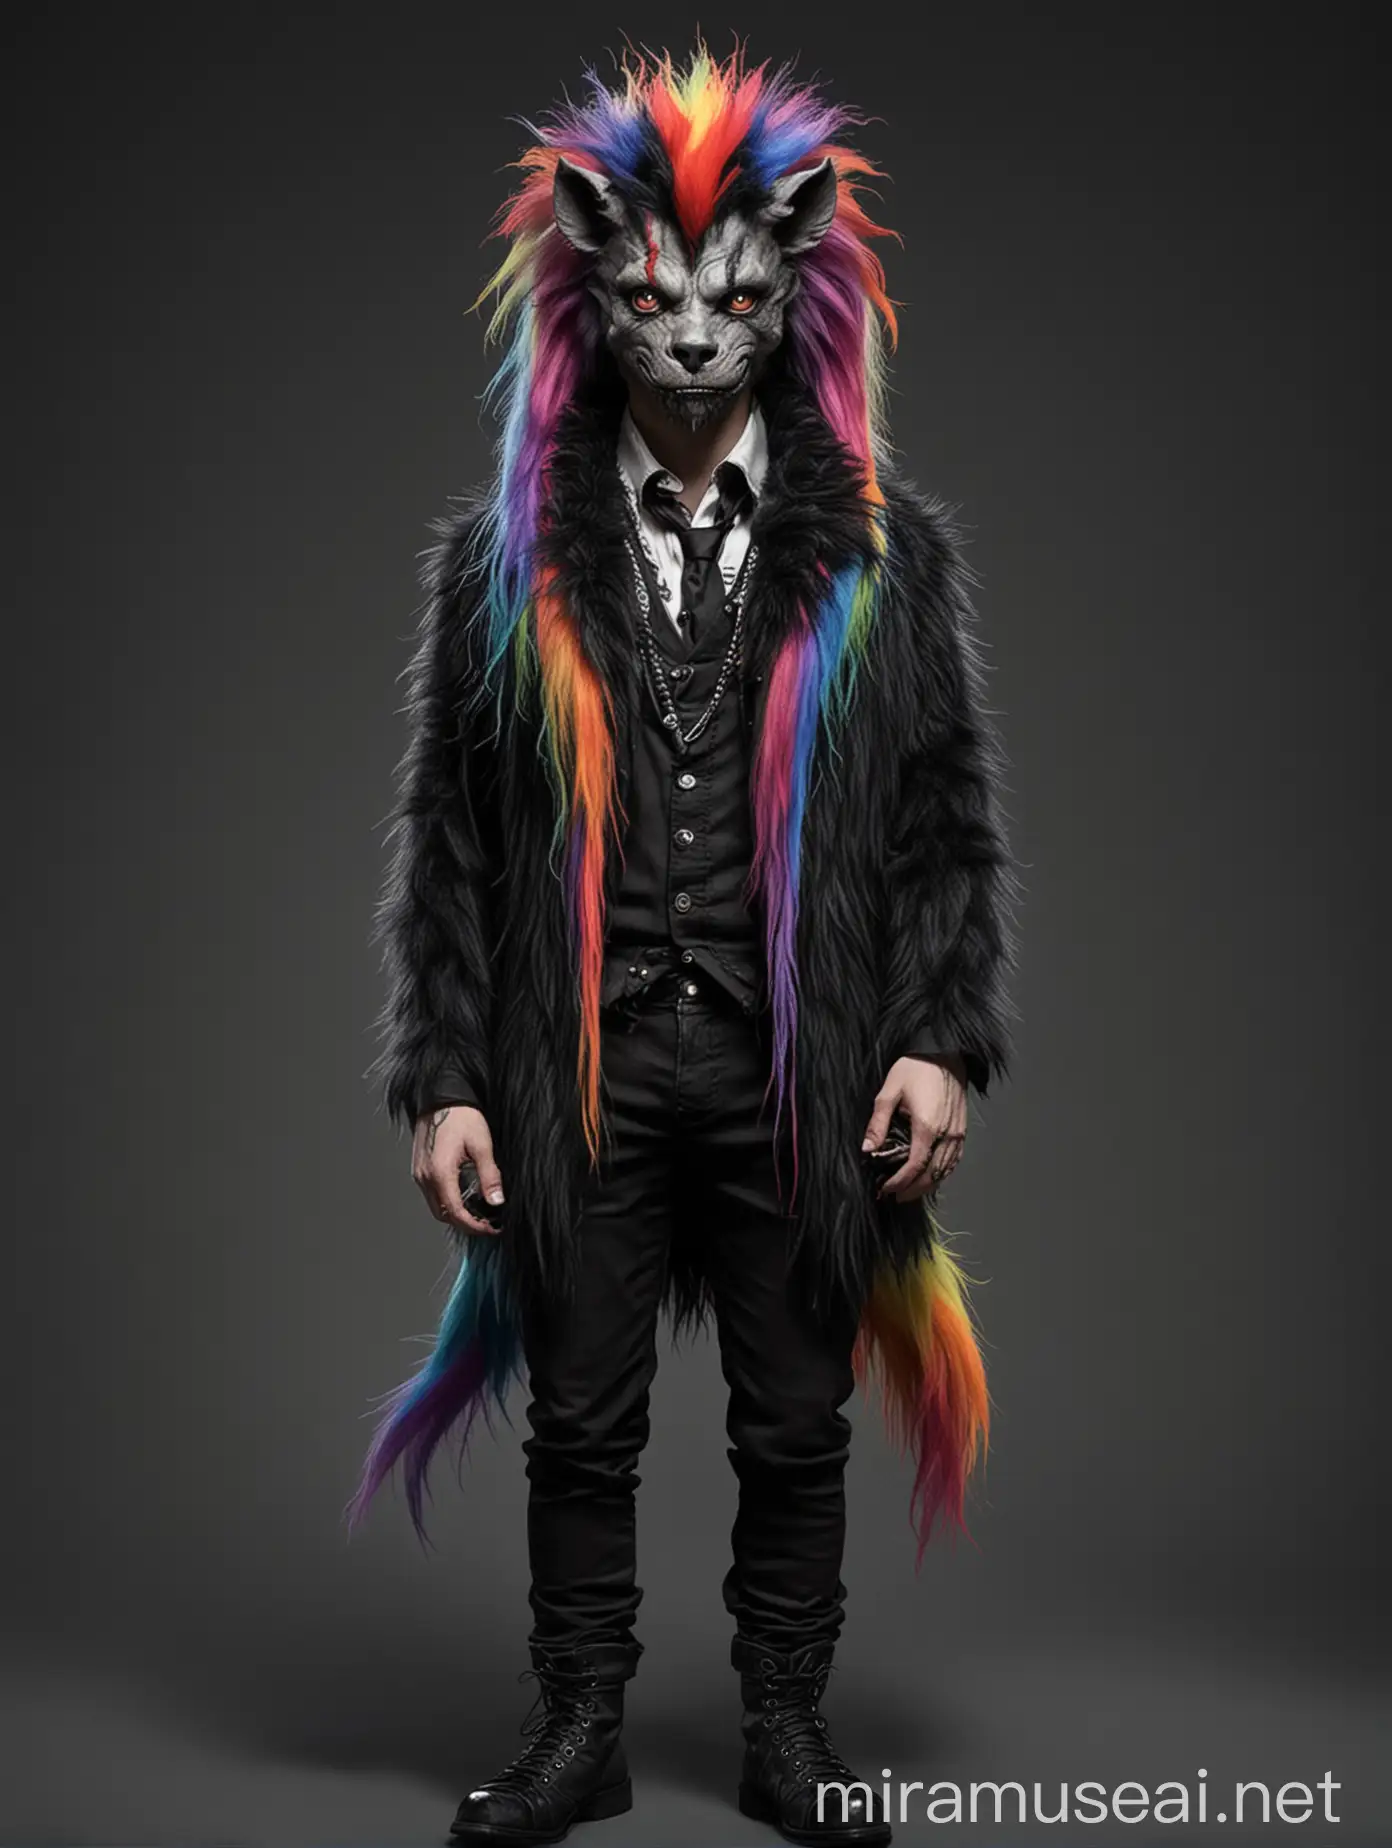 Cute Gothic Style Rainbow Furr Monster with Ponytail Hair